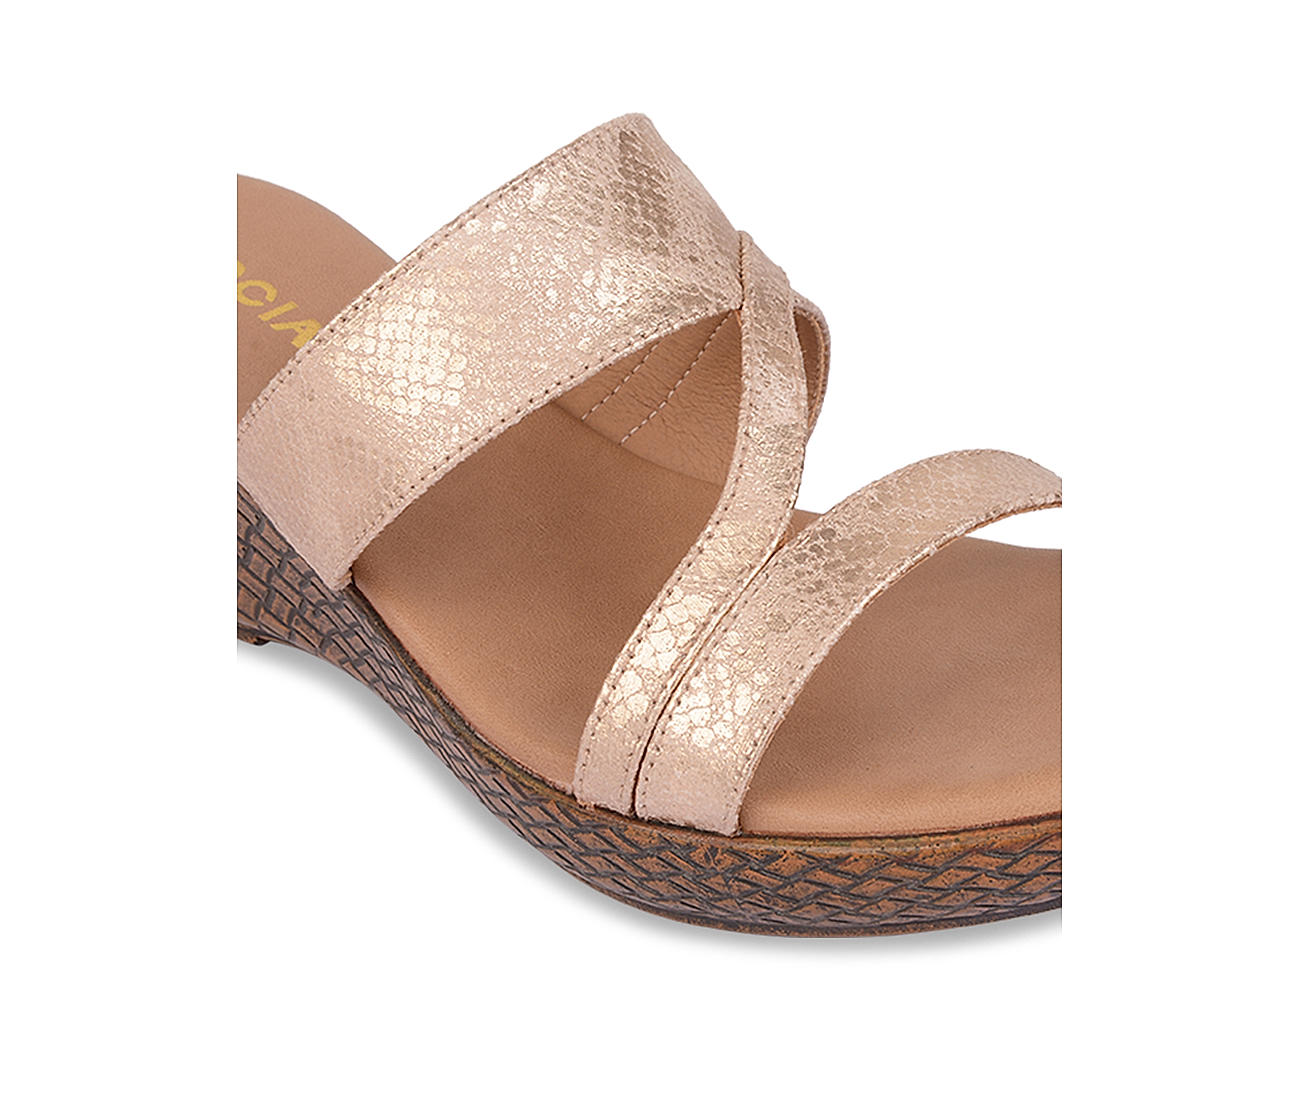 GC Shoes Mona Wedge Sandal - Free Shipping | DSW